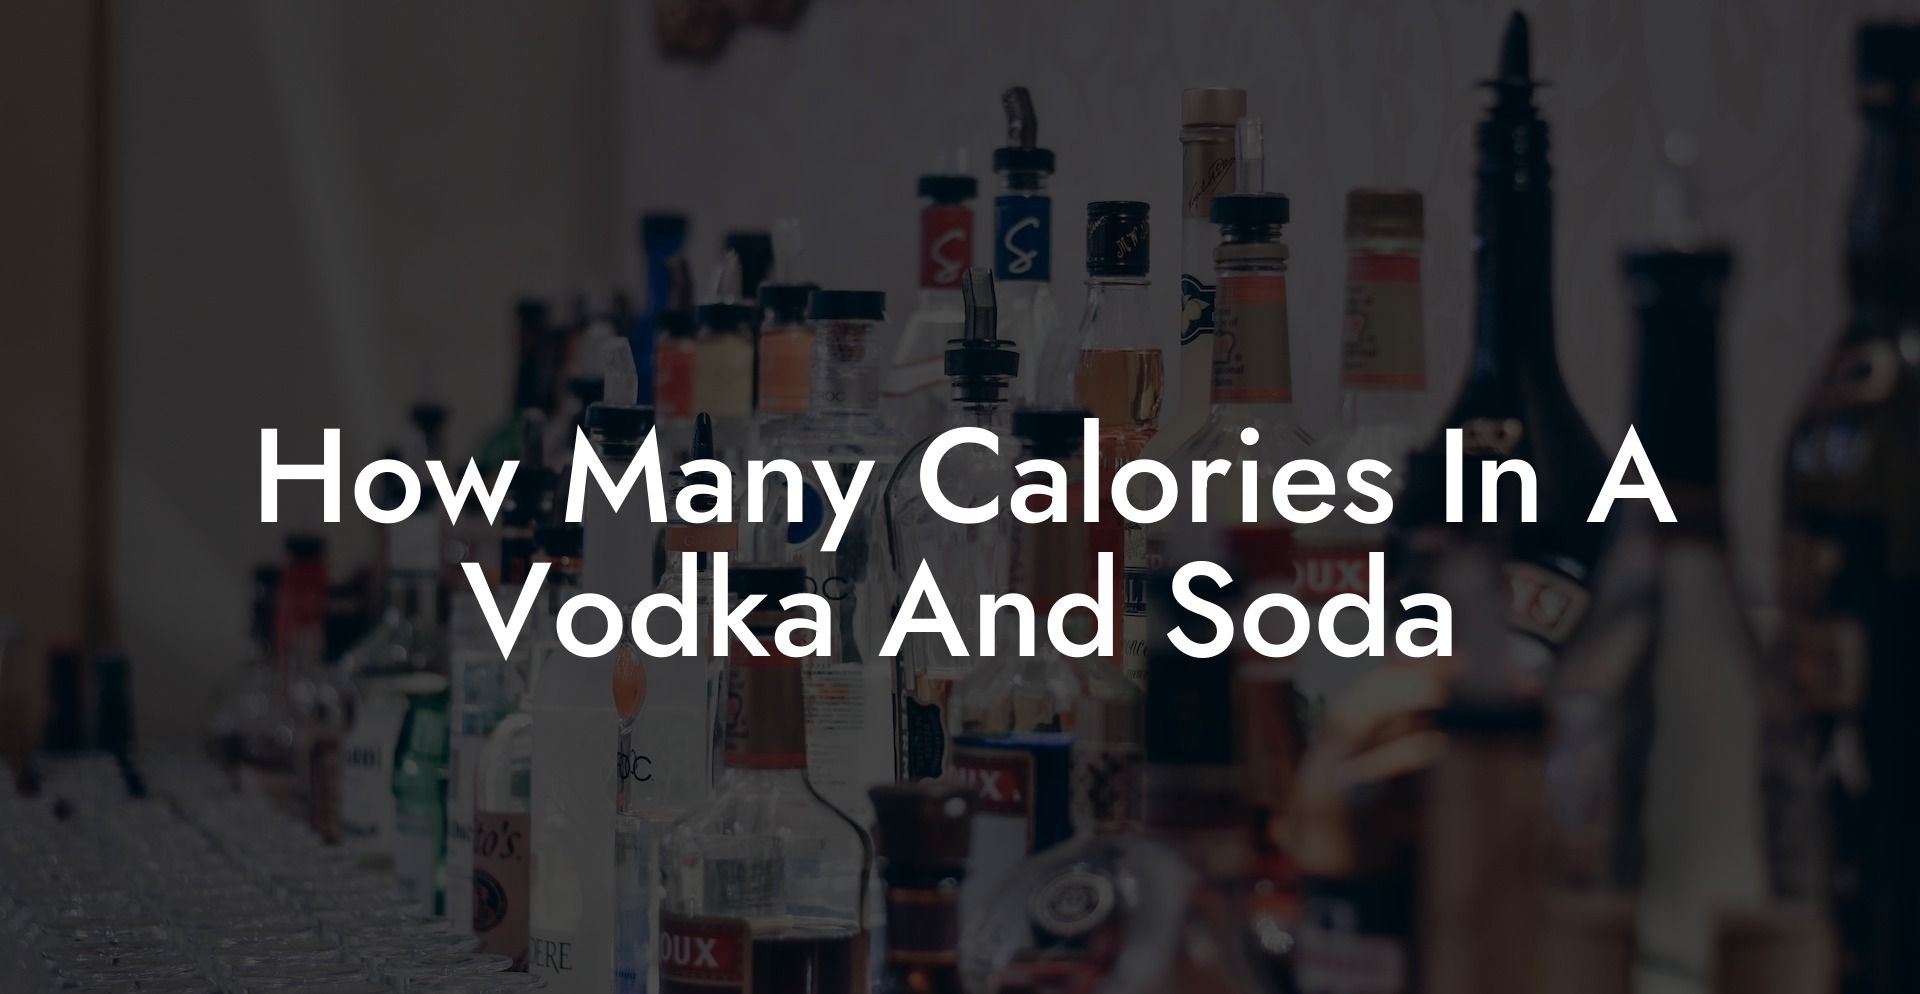 How Many Calories In A Vodka And Soda